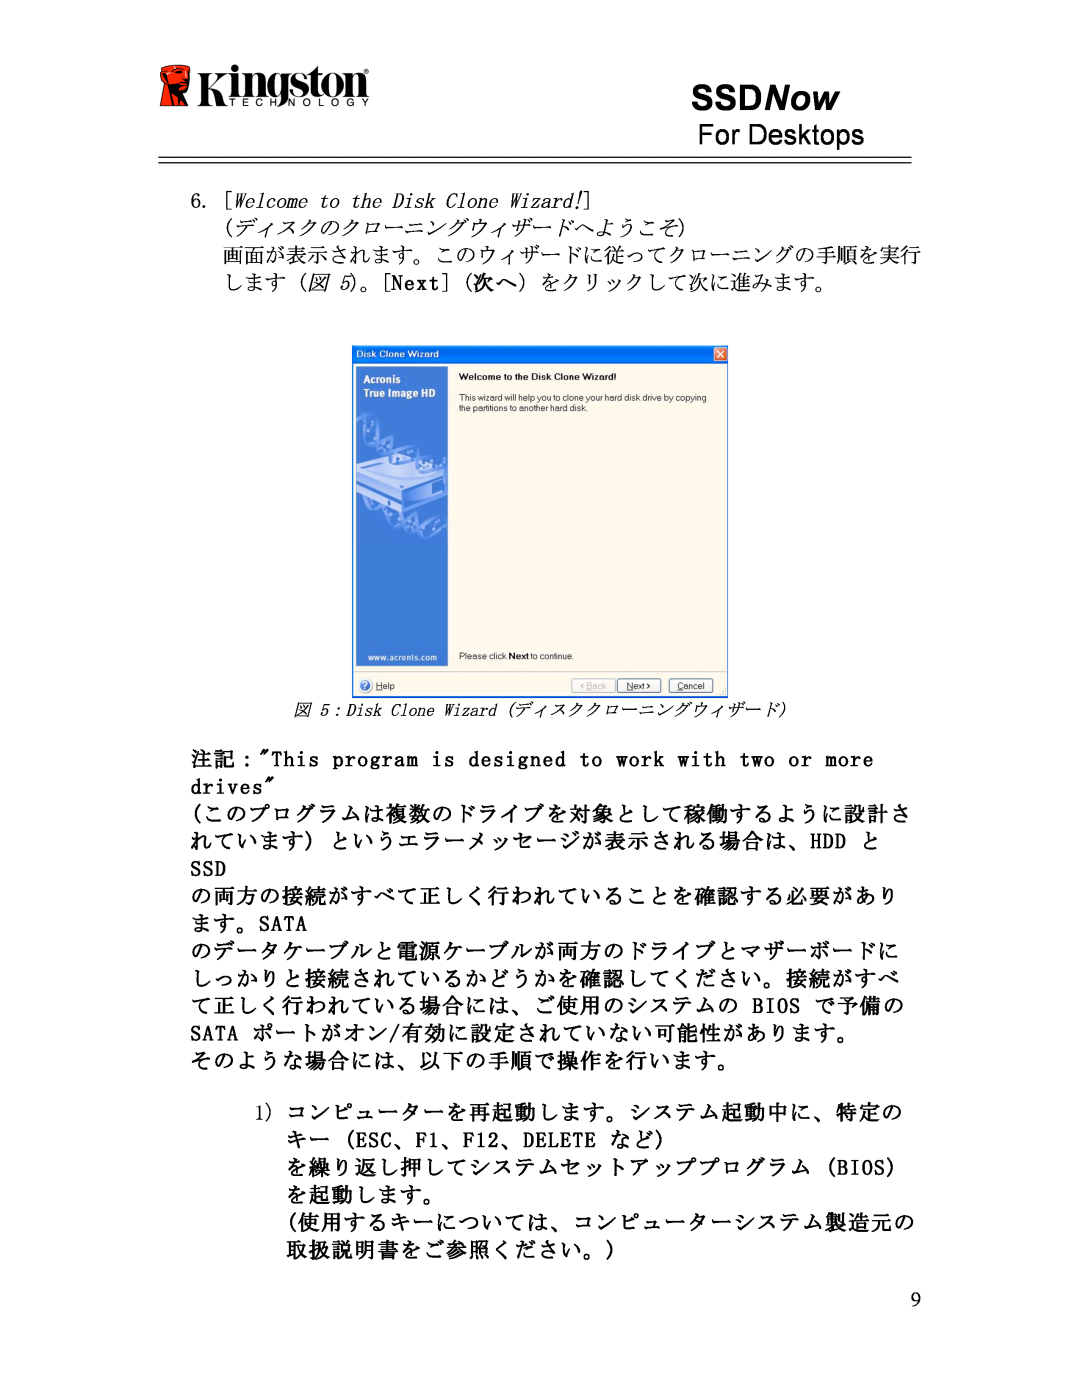 Kingston Technology 07-16-2009 manual Welcome to the Disk Clone Wizard, SSDNow, For Desktops, ディスクのクローニングウィザードへようこそ 